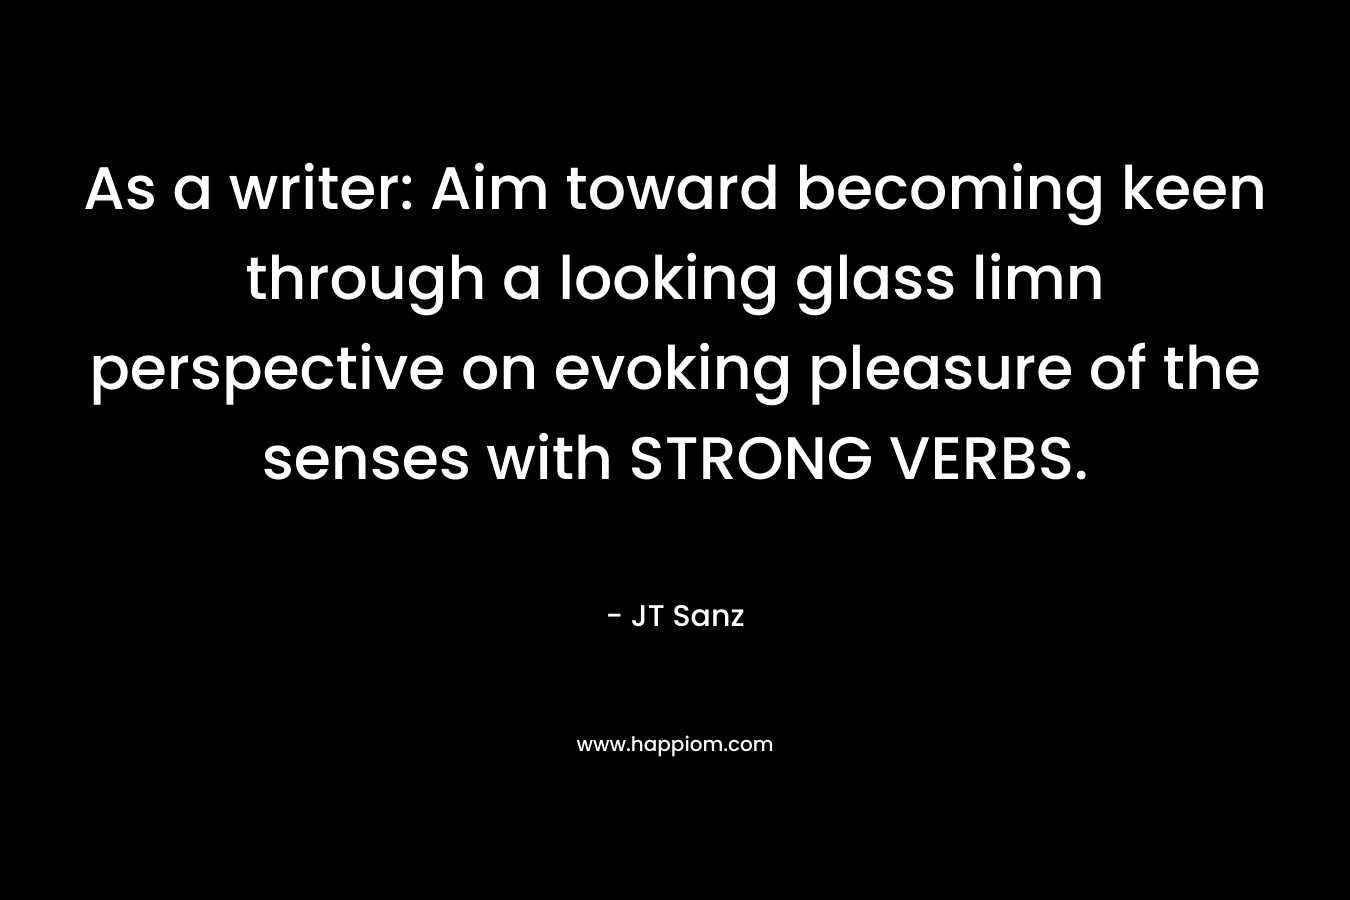 As a writer: Aim toward becoming keen through a looking glass limn perspective on evoking pleasure of the senses with STRONG VERBS.